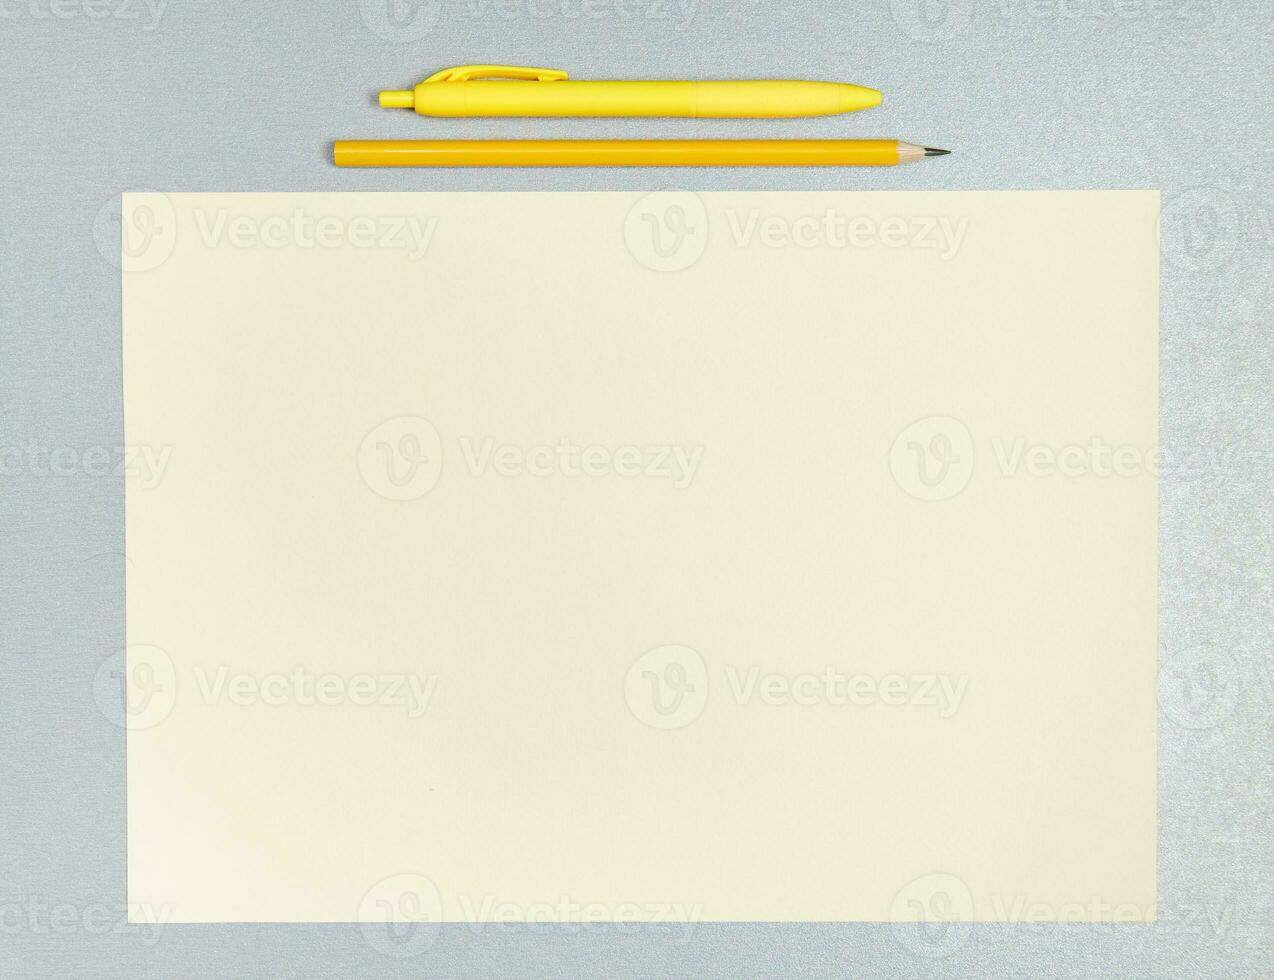 Flat lay composition of yellow pen, pencil and sheet of paper on a gray surface photo